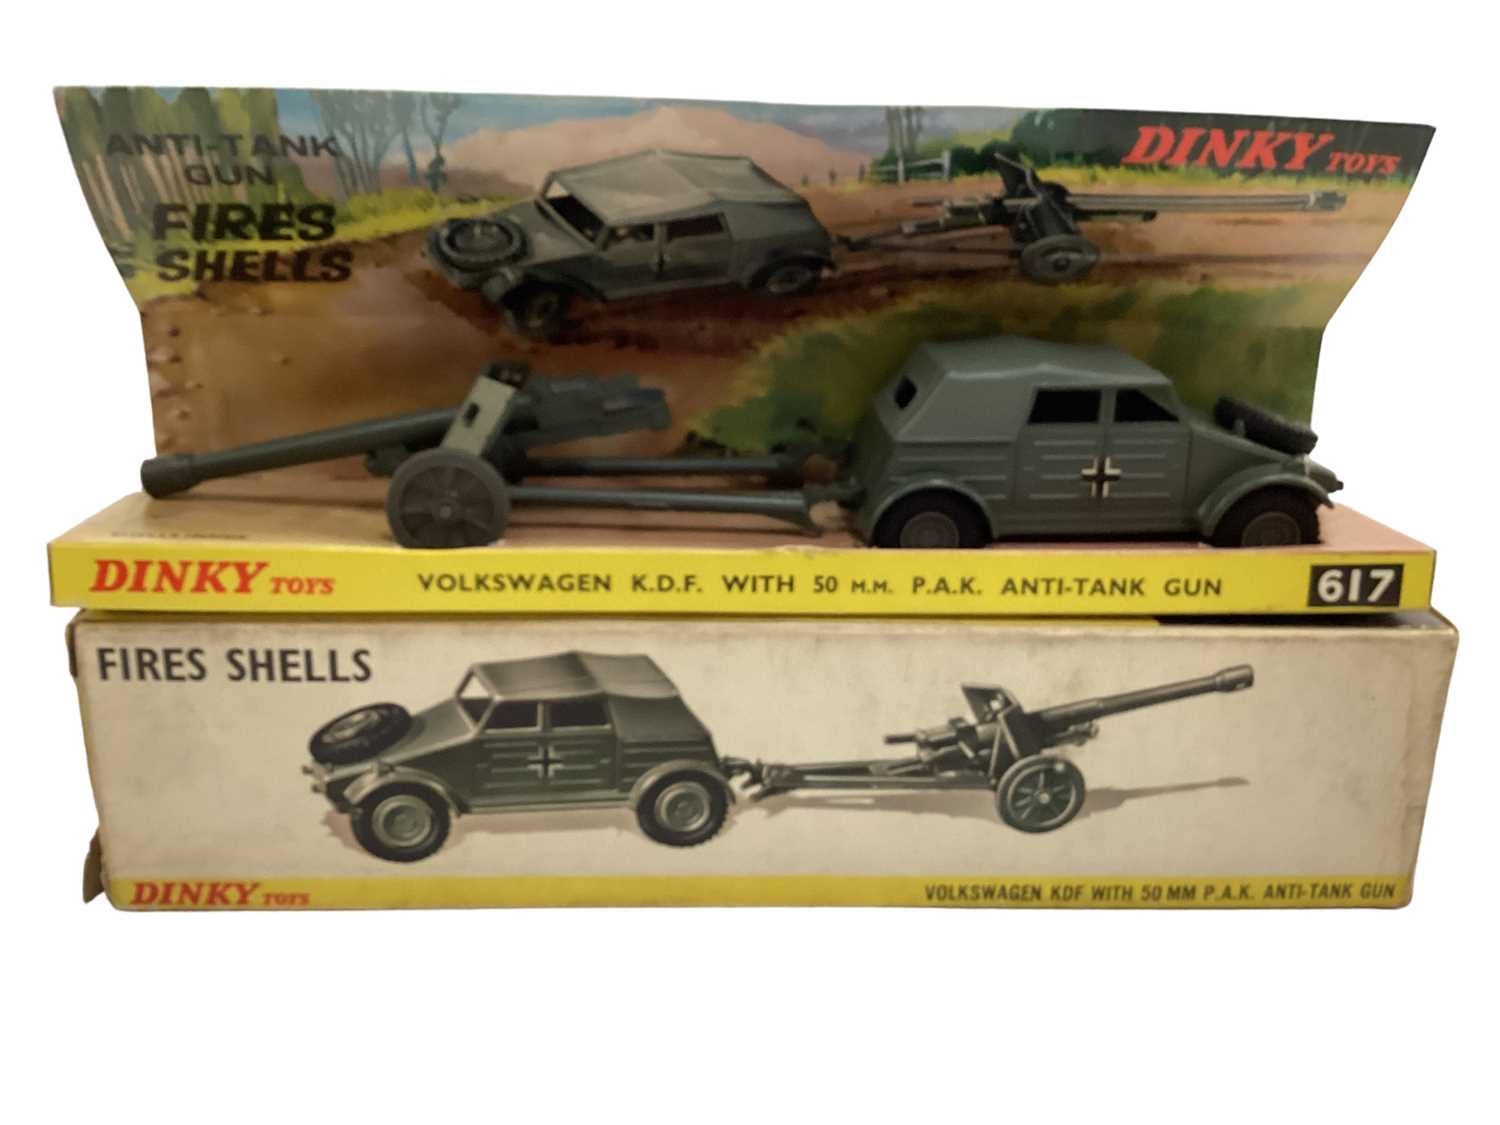 Two boxes of Dinky military vehicles